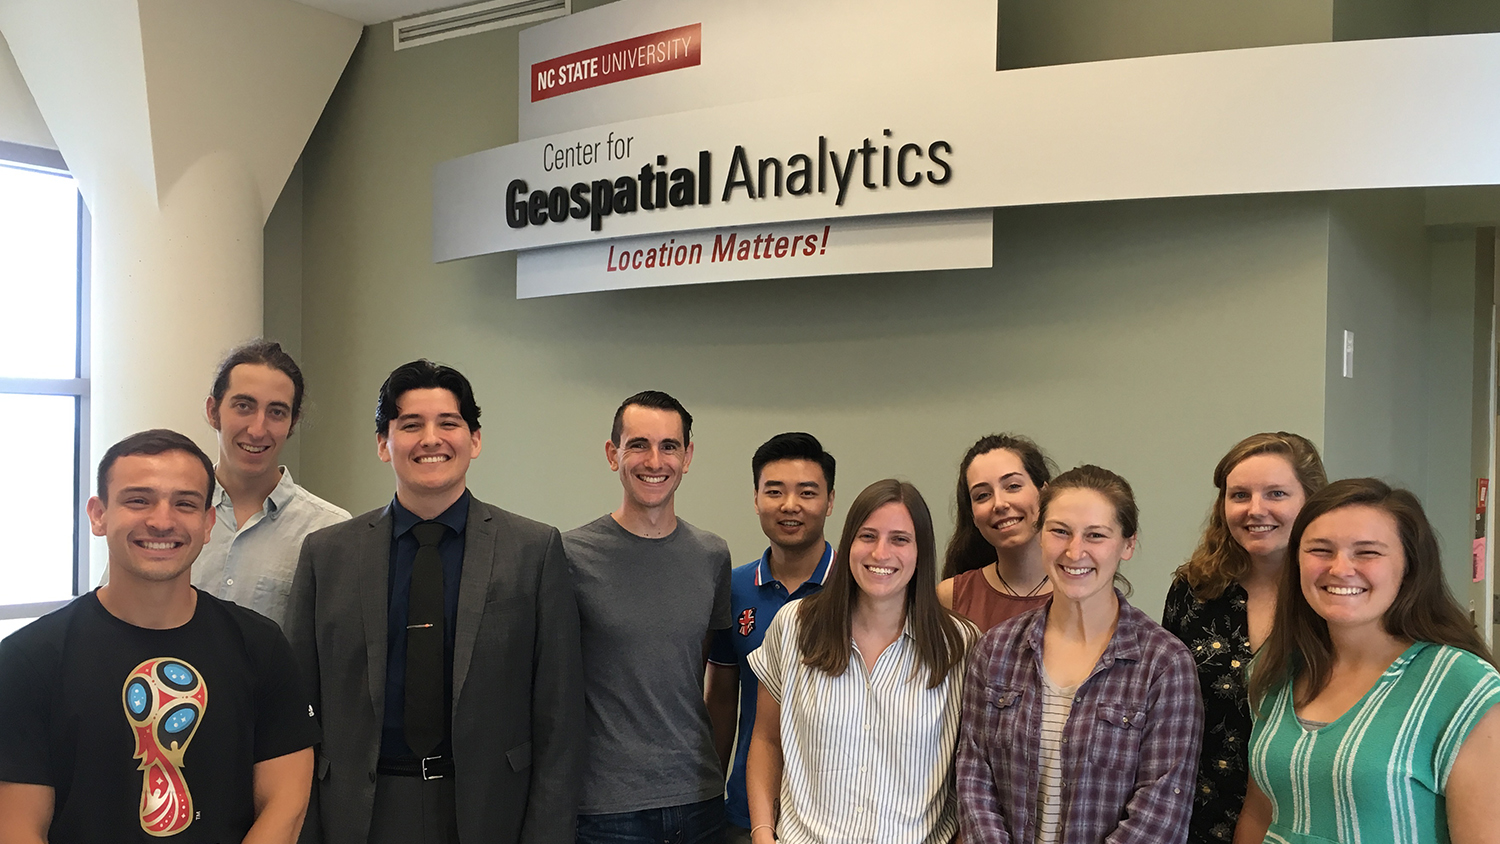 Fall 2019 Orientation - Center for Geospatial Analytics at NC State University